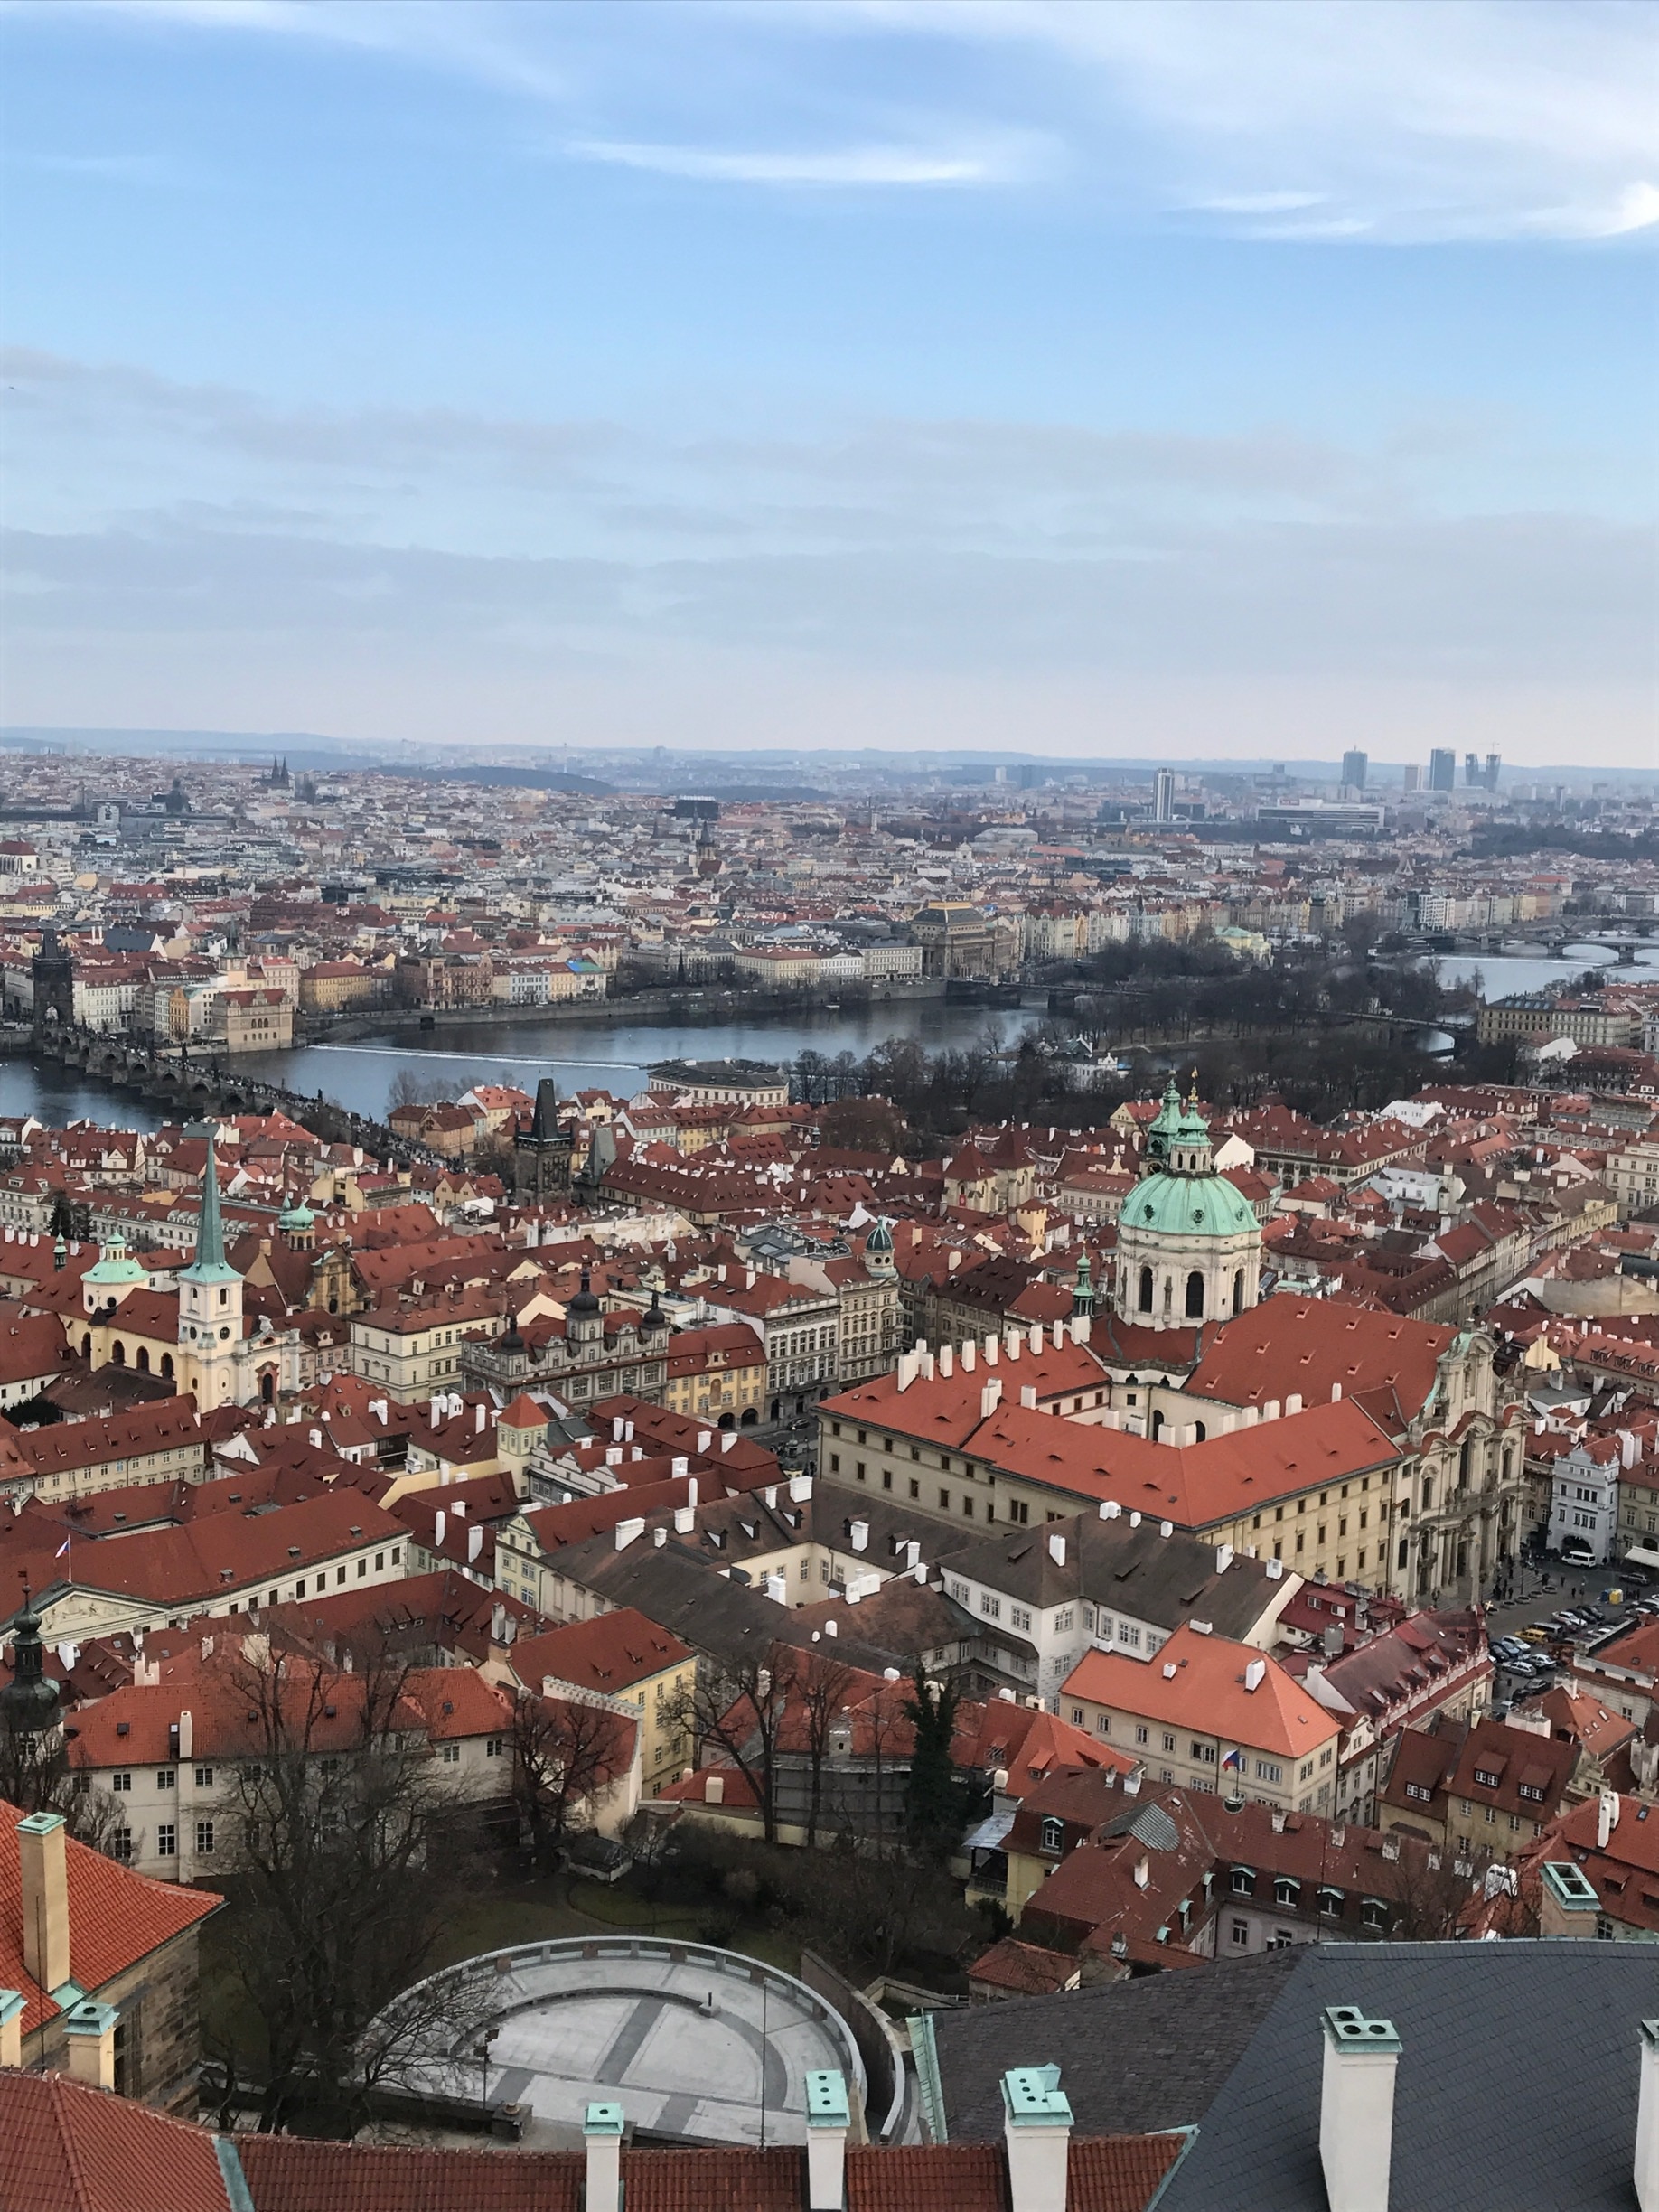 If you're in Prague go up the tower to see the most amazing views. There was a lot of steps to climb, but 100% worth it. 